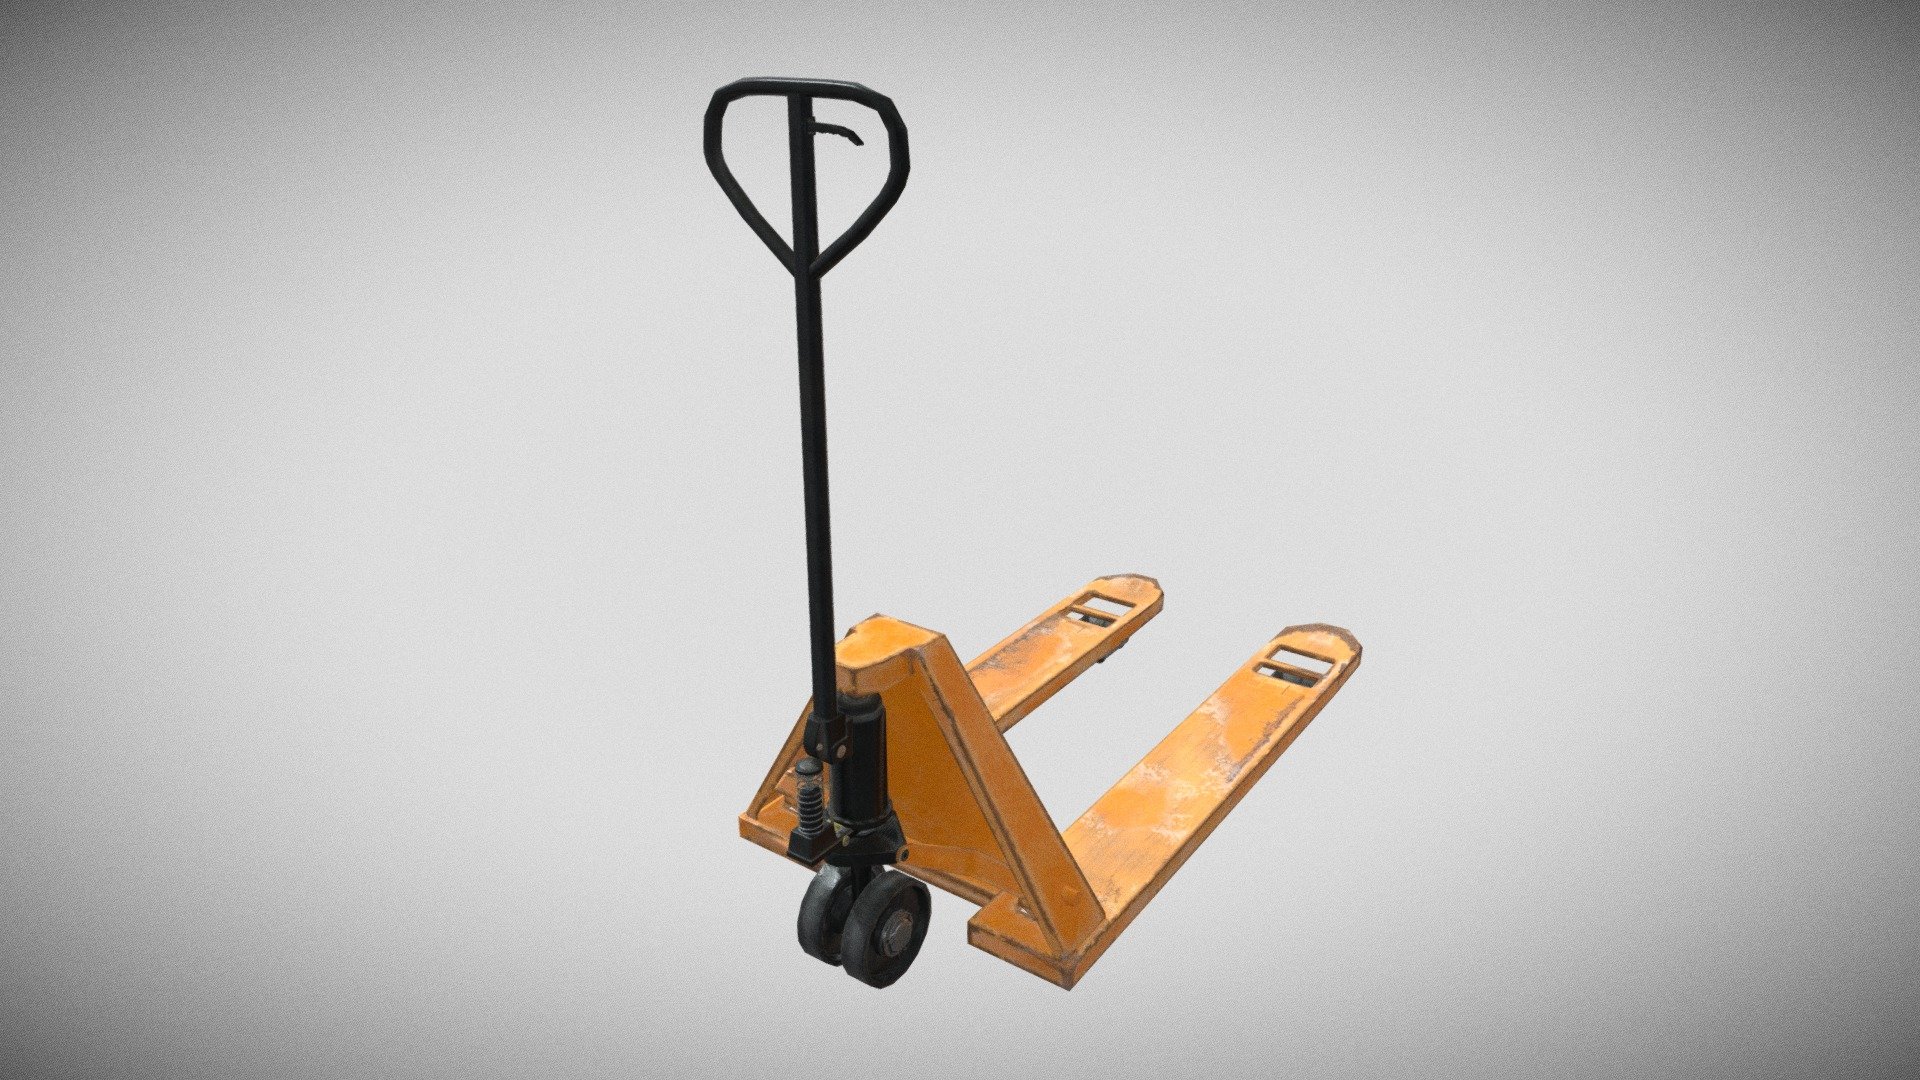 A game-ready model of a Pallet Truck / Pallet Jack

Tris count - 5667;
Vertices - 3159;
4 model formats available (obj, fbx, blend, stl);
1 set each (4096x4096; 2048x2048; 1024x1024; 512x512; 256x256);
model got the real world size;
The model (lowpoly &amp; highpoly, UV Unwrapping) was done in Blender;
Baked in Marmoset Toolbag 4;
Textured in Substance 3D Painter;
Rendered in Marmoset Toolbag 4 3d model